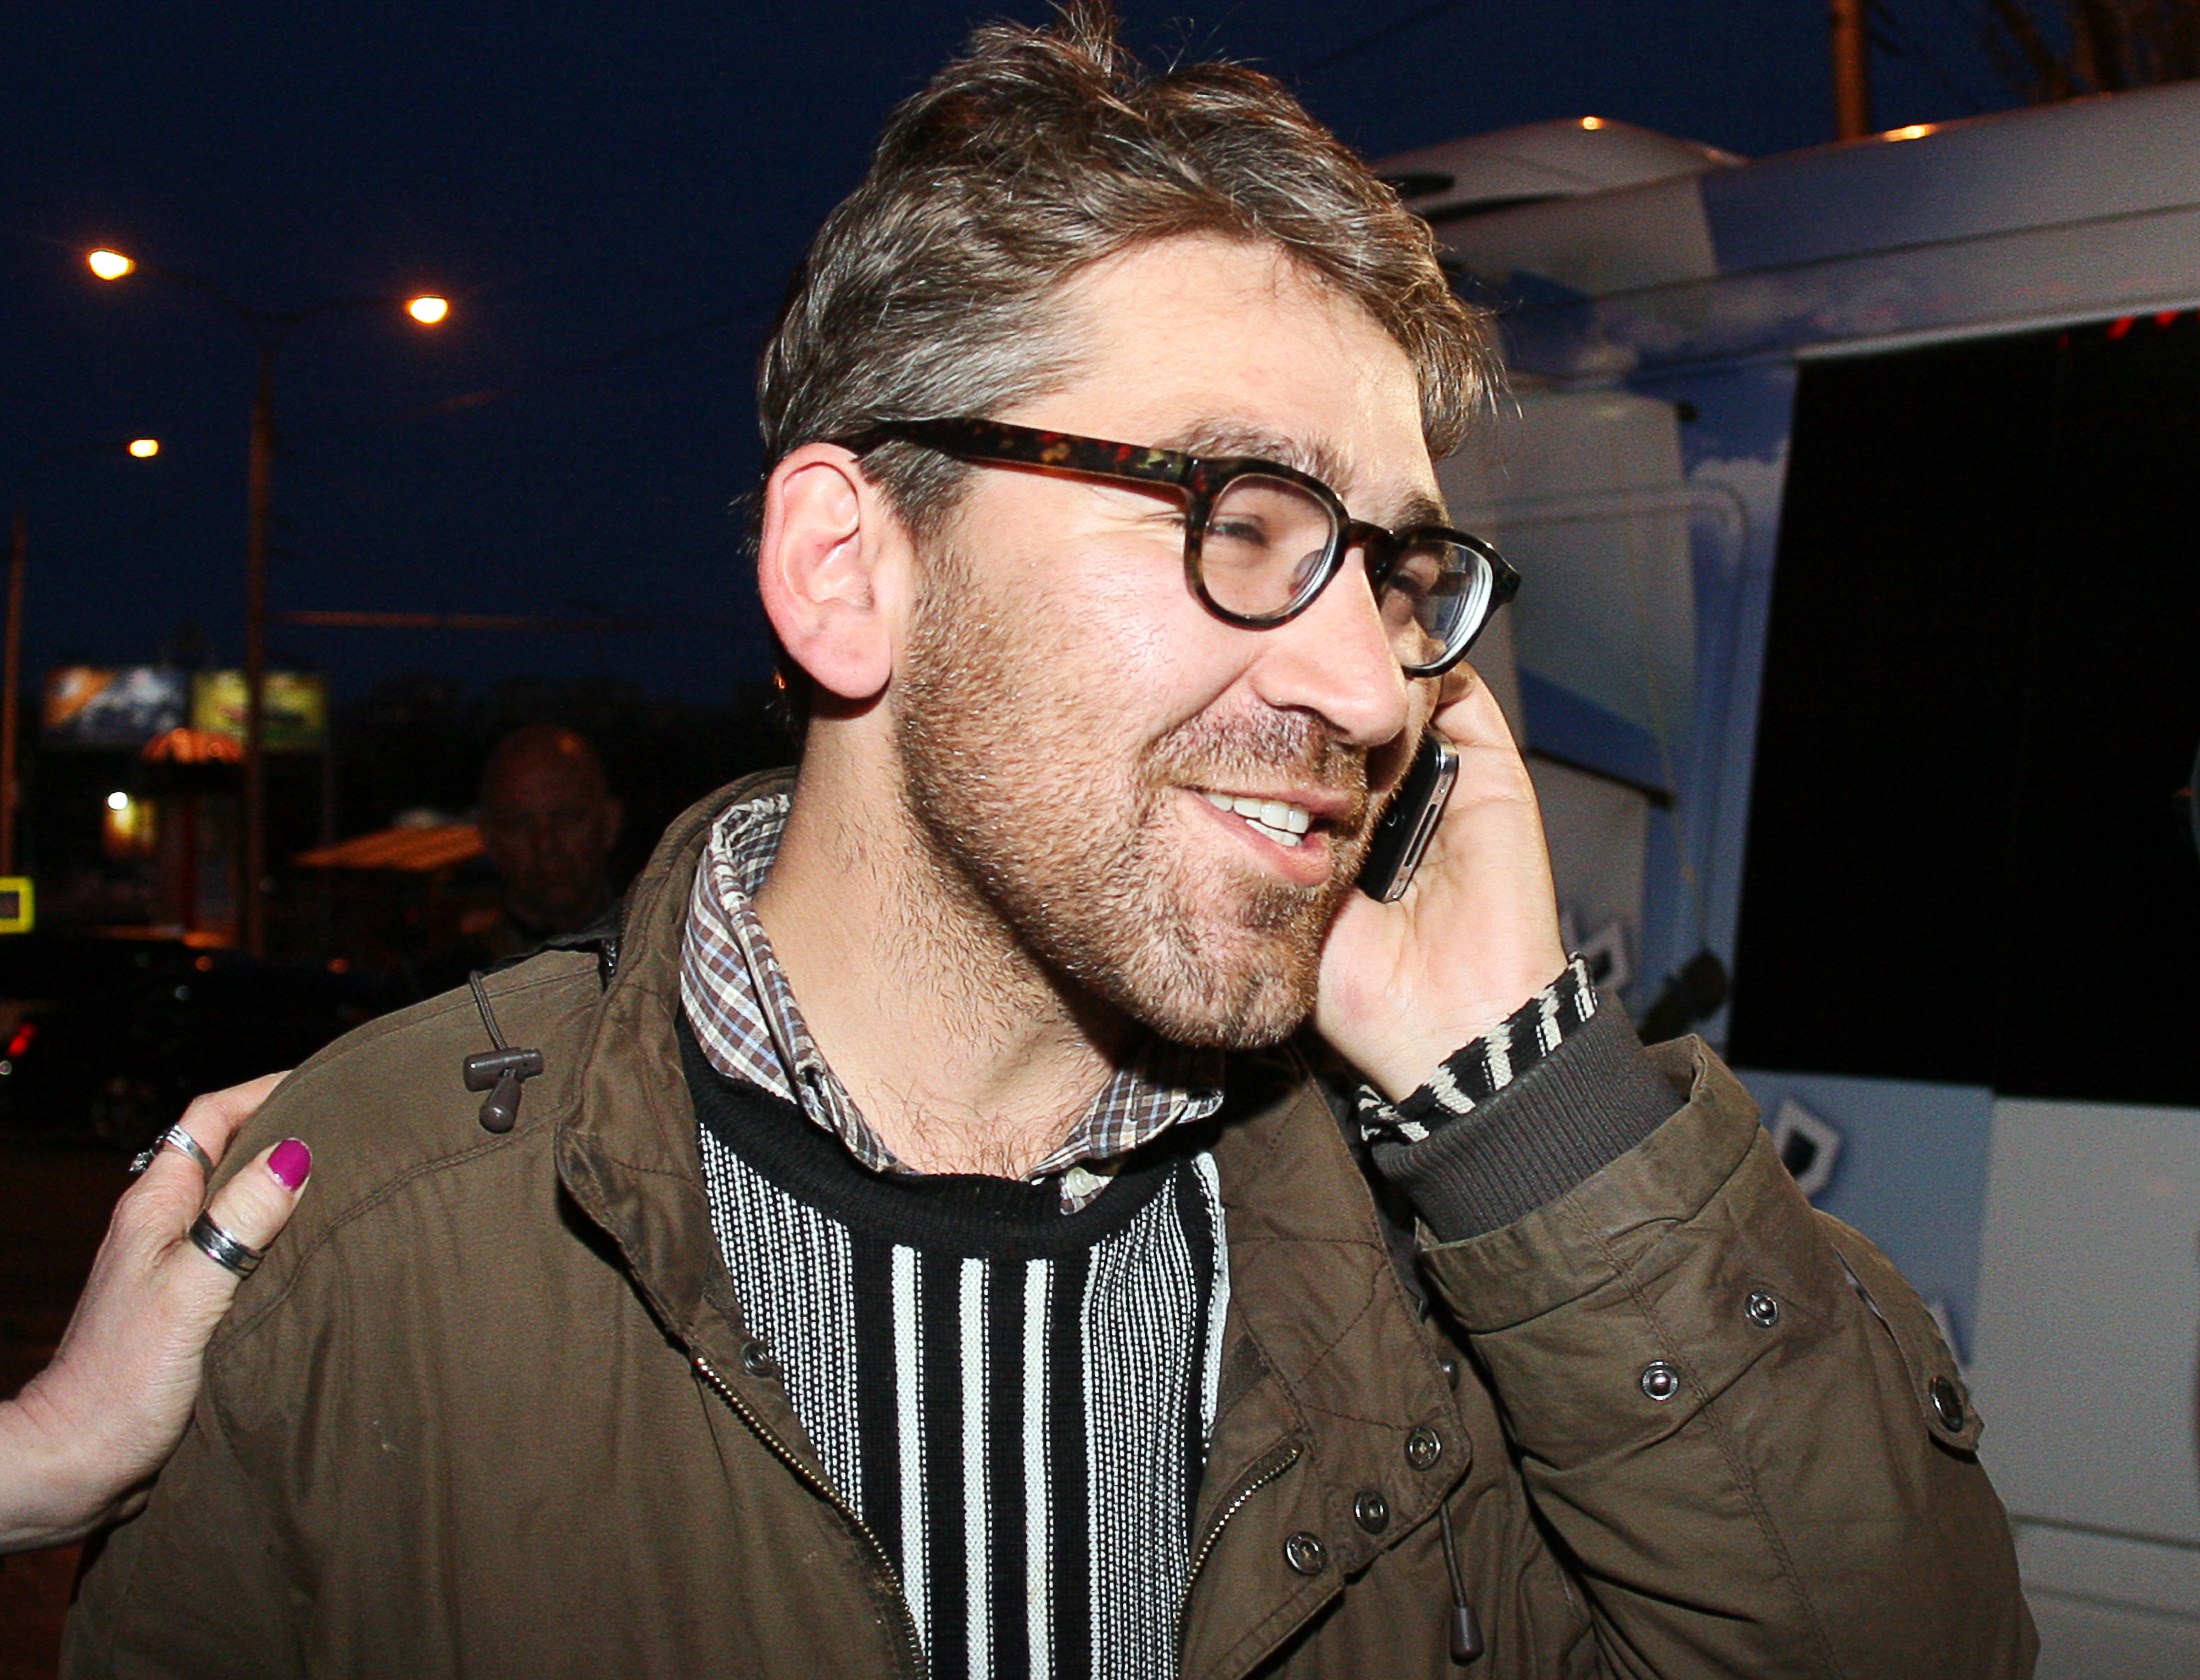 Simon Ostrovsky, who was abducted and held by pro-Kremlin rebels in east Ukraine this week, speaks on a mobile phone as he arrives in a hotel in the eastern Ukrainian city of Donetsk after being freed, on April 24, 2014. (Alexander Khudoteply—AFP/Getty Images)